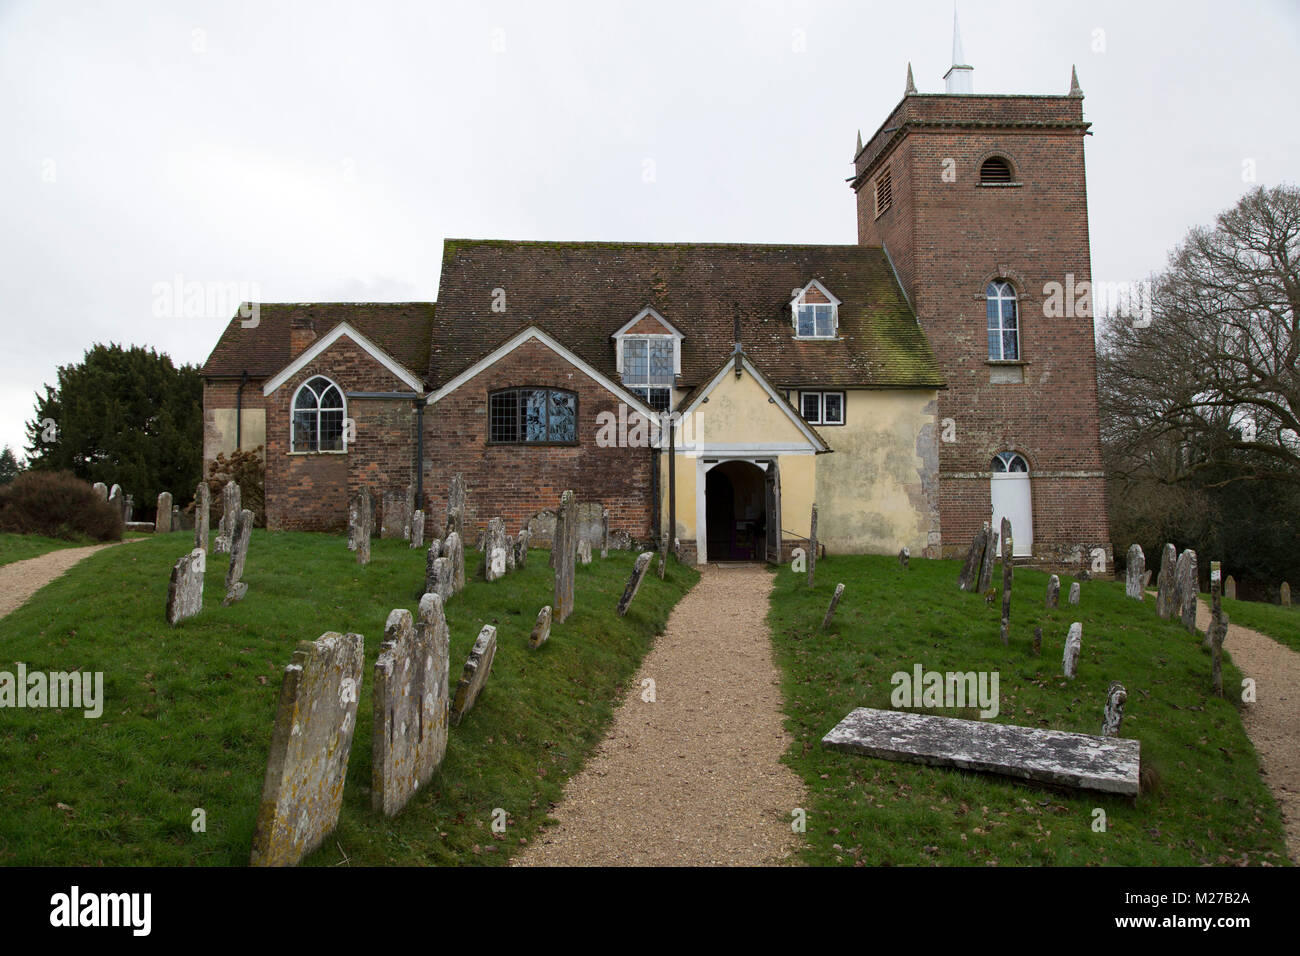 All Saints Church and Churchyard in Minstead, England. The village is in the New Forest. Stock Photo